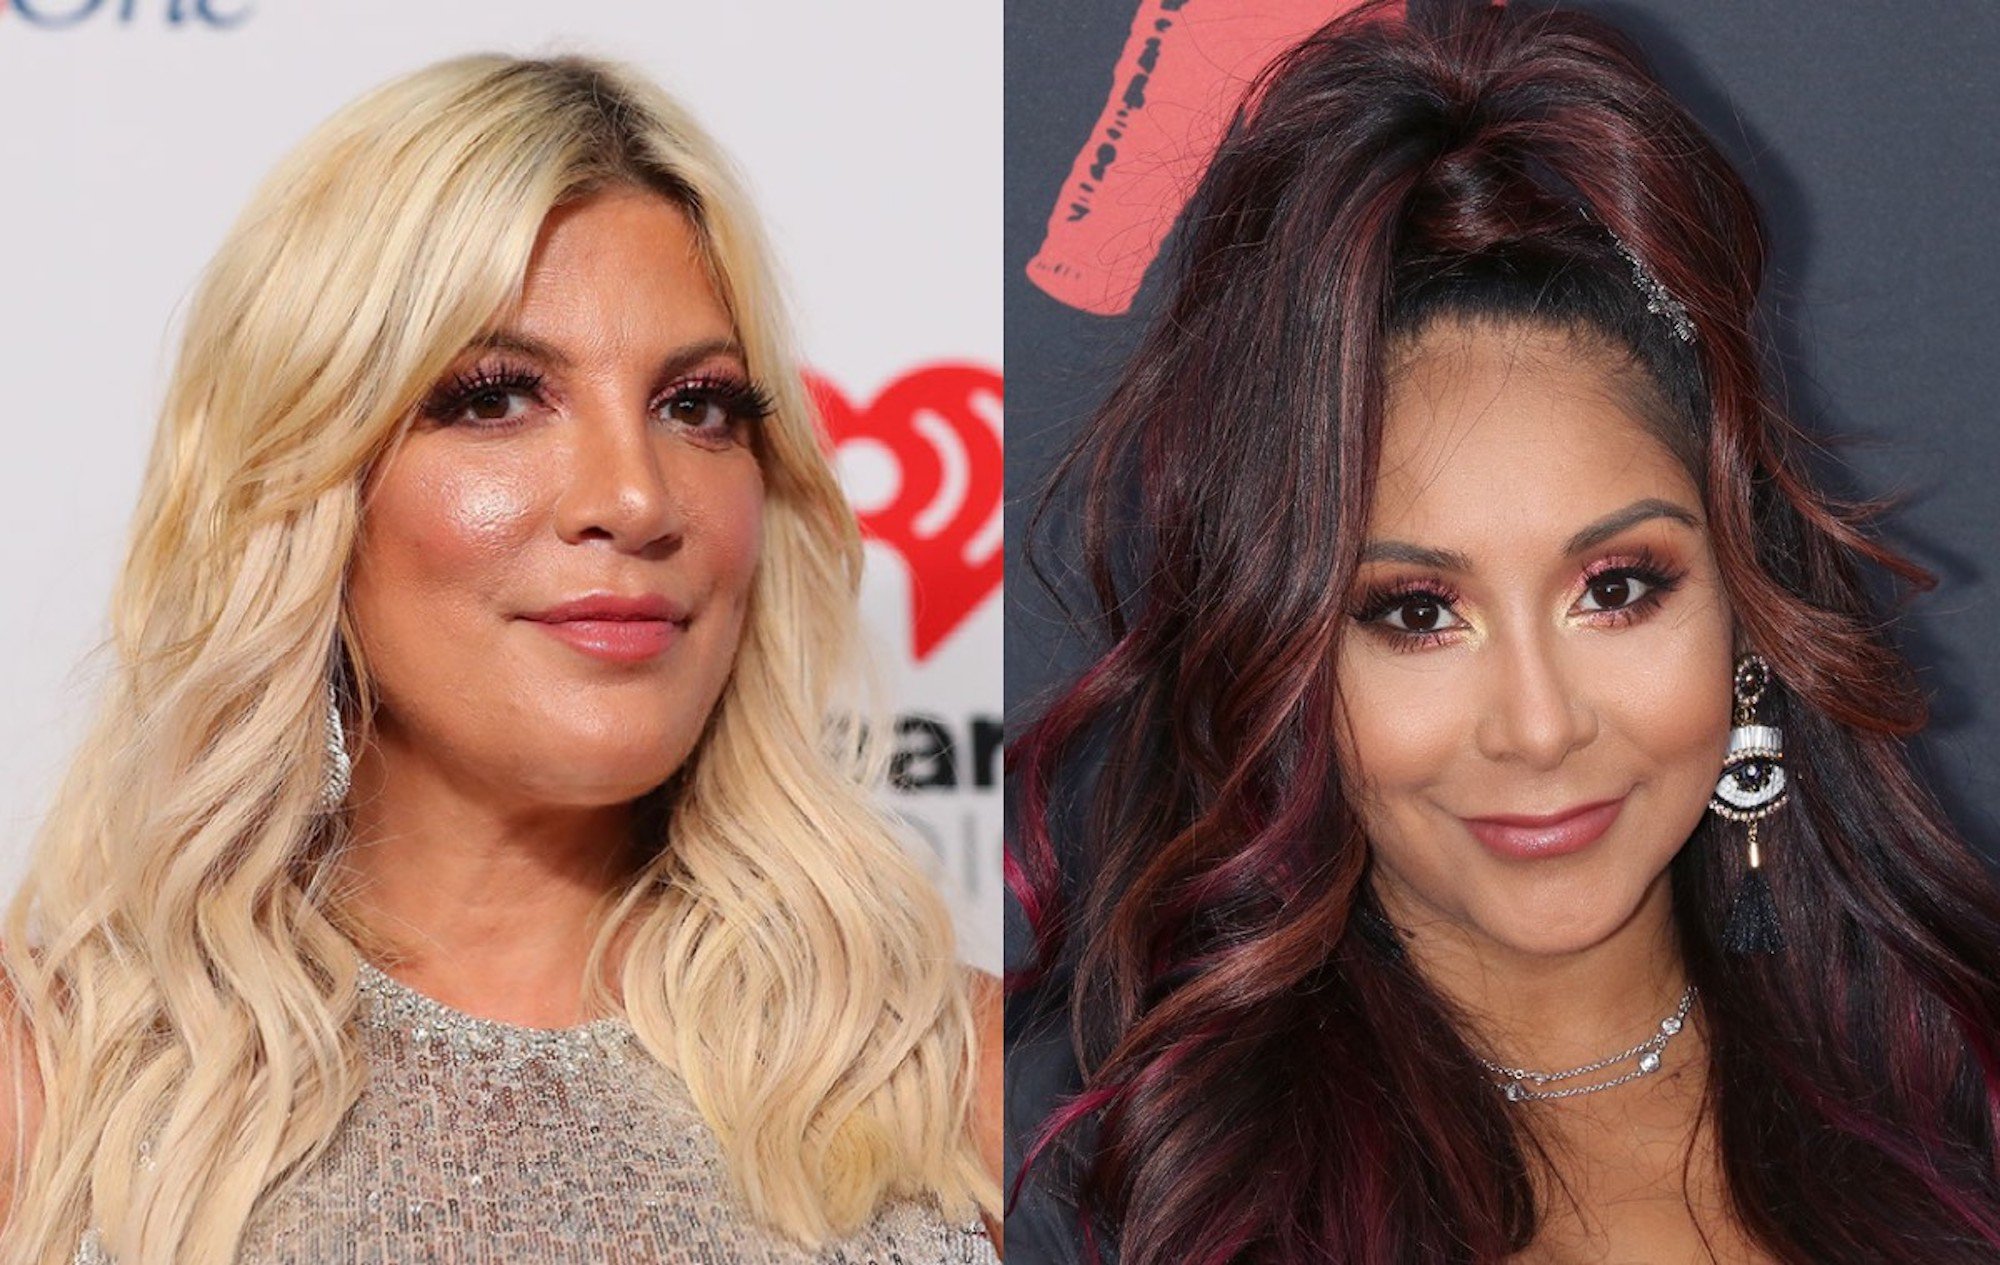 Tori Spelling, Nicole 'Snooki' Polizzi, who will both appear on 'Messyness'